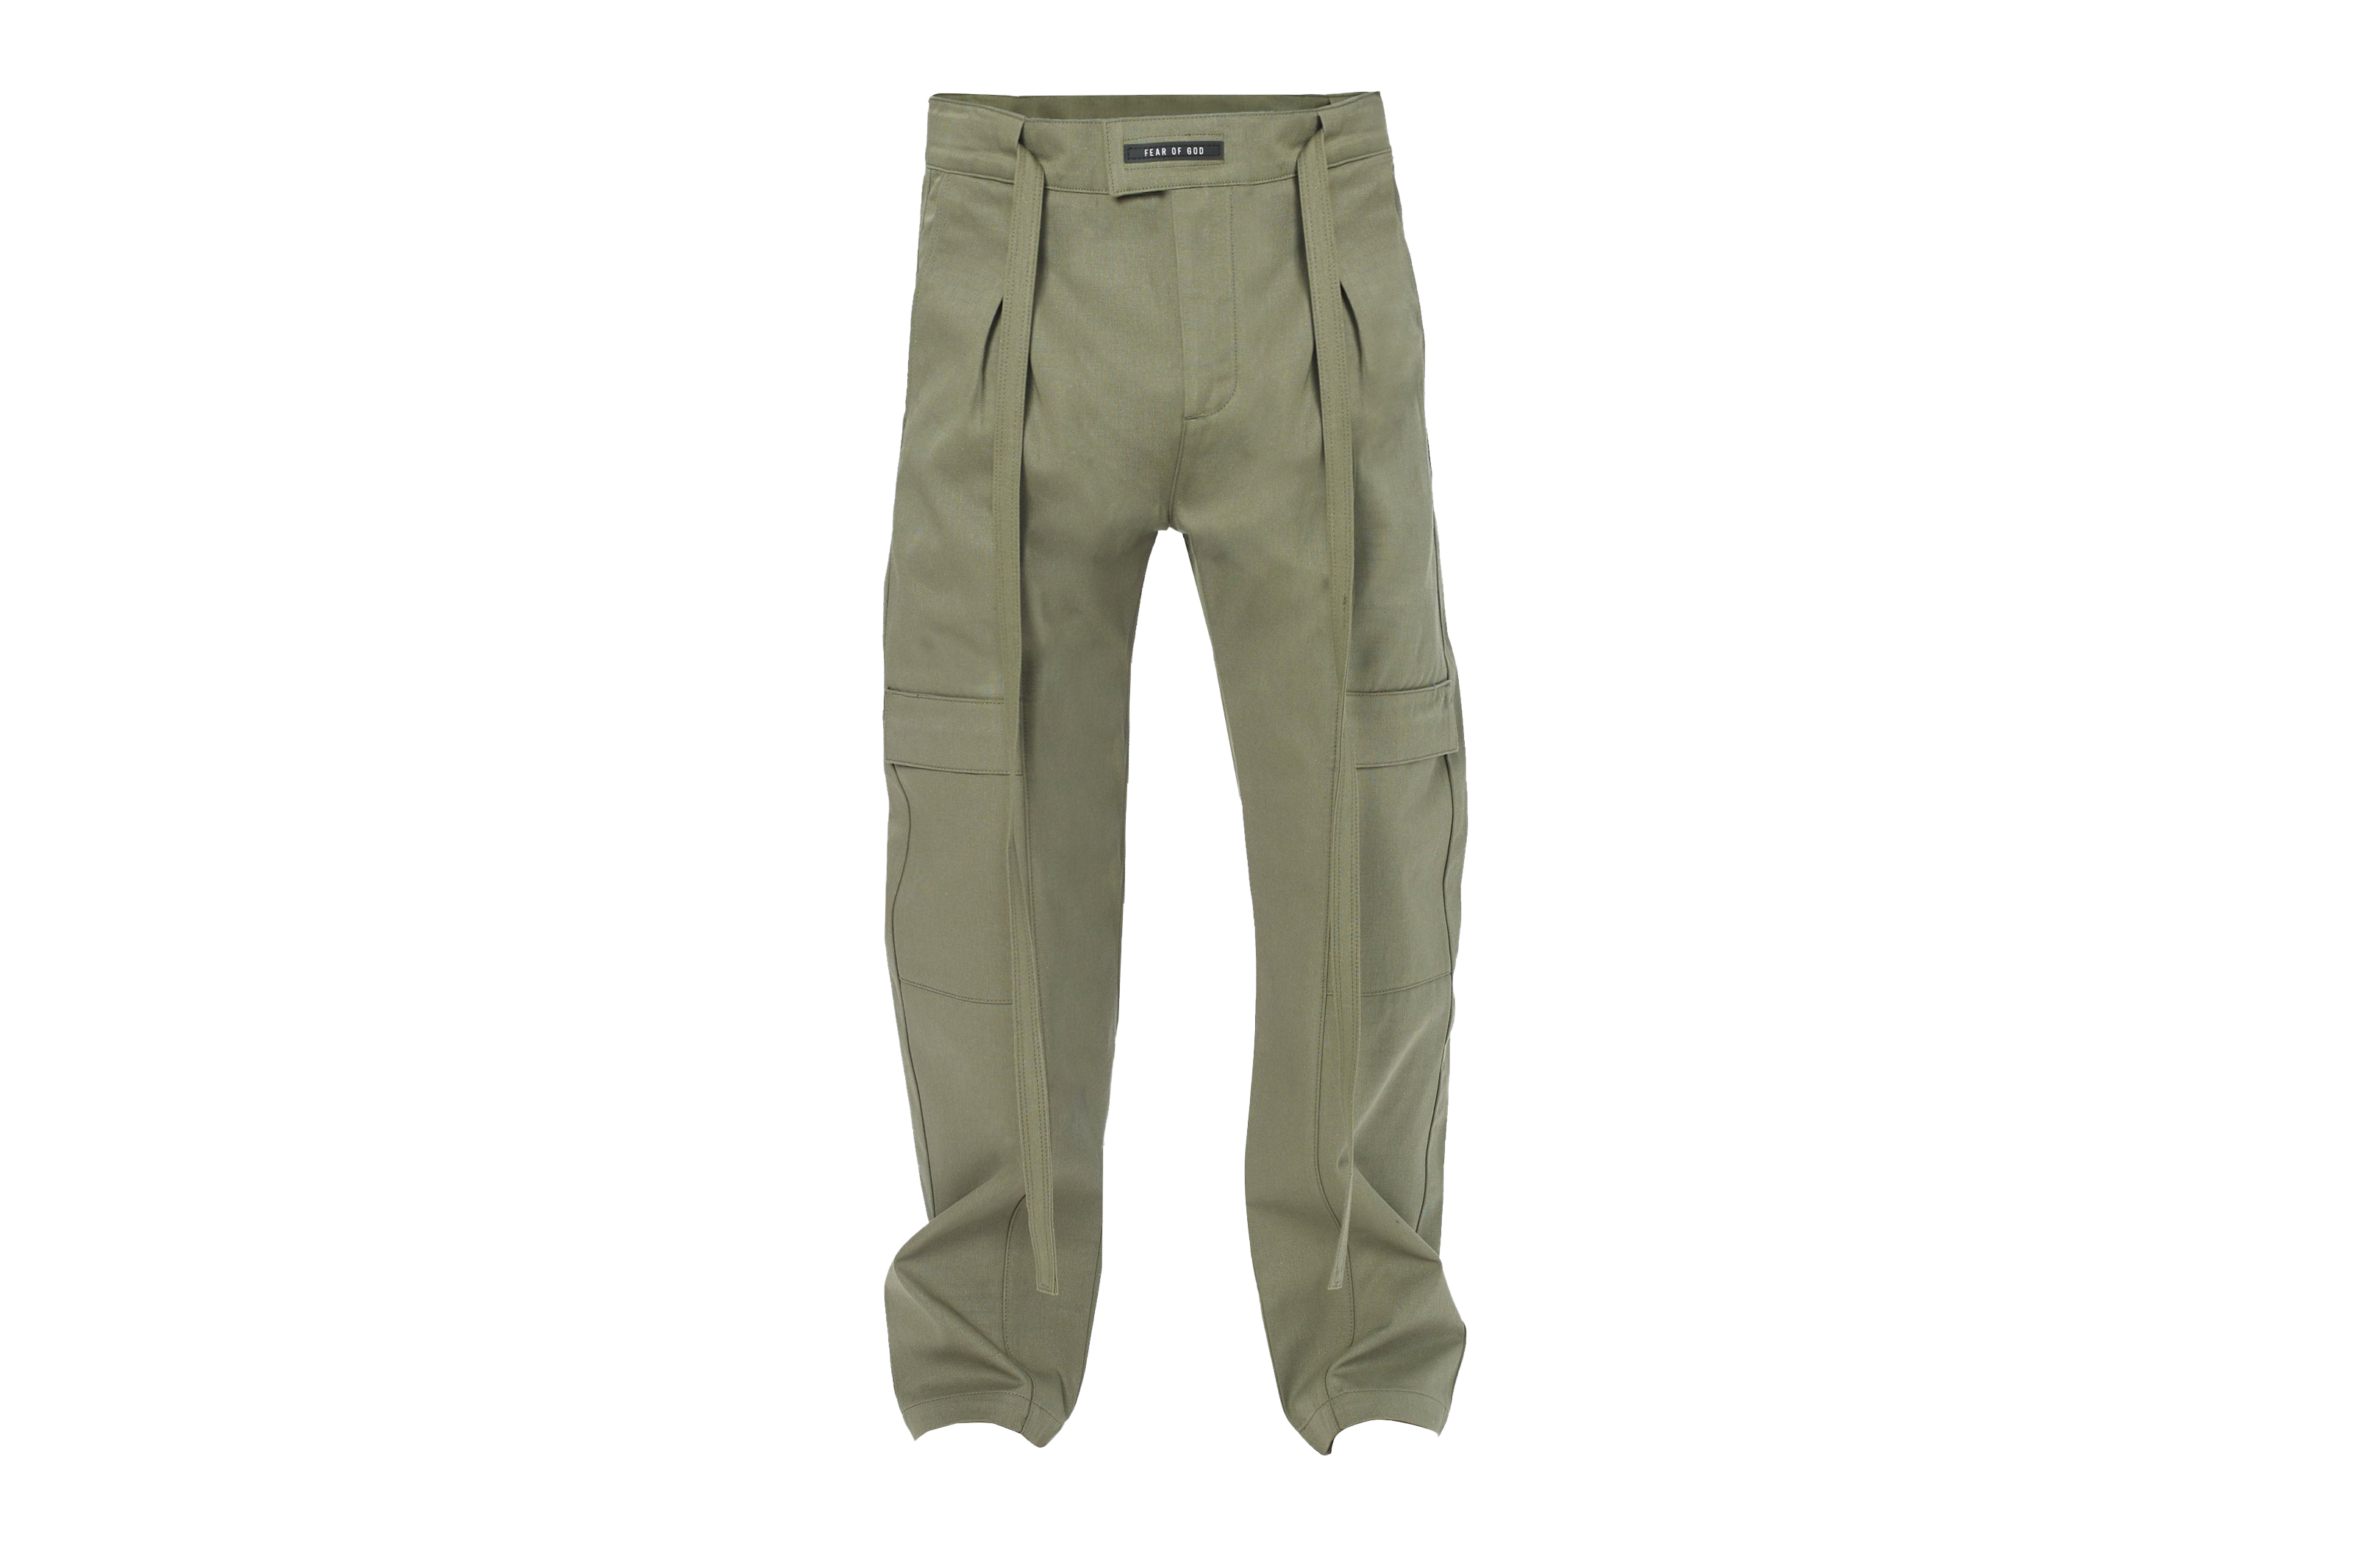 Fear of God Chino Baggy Pants M-